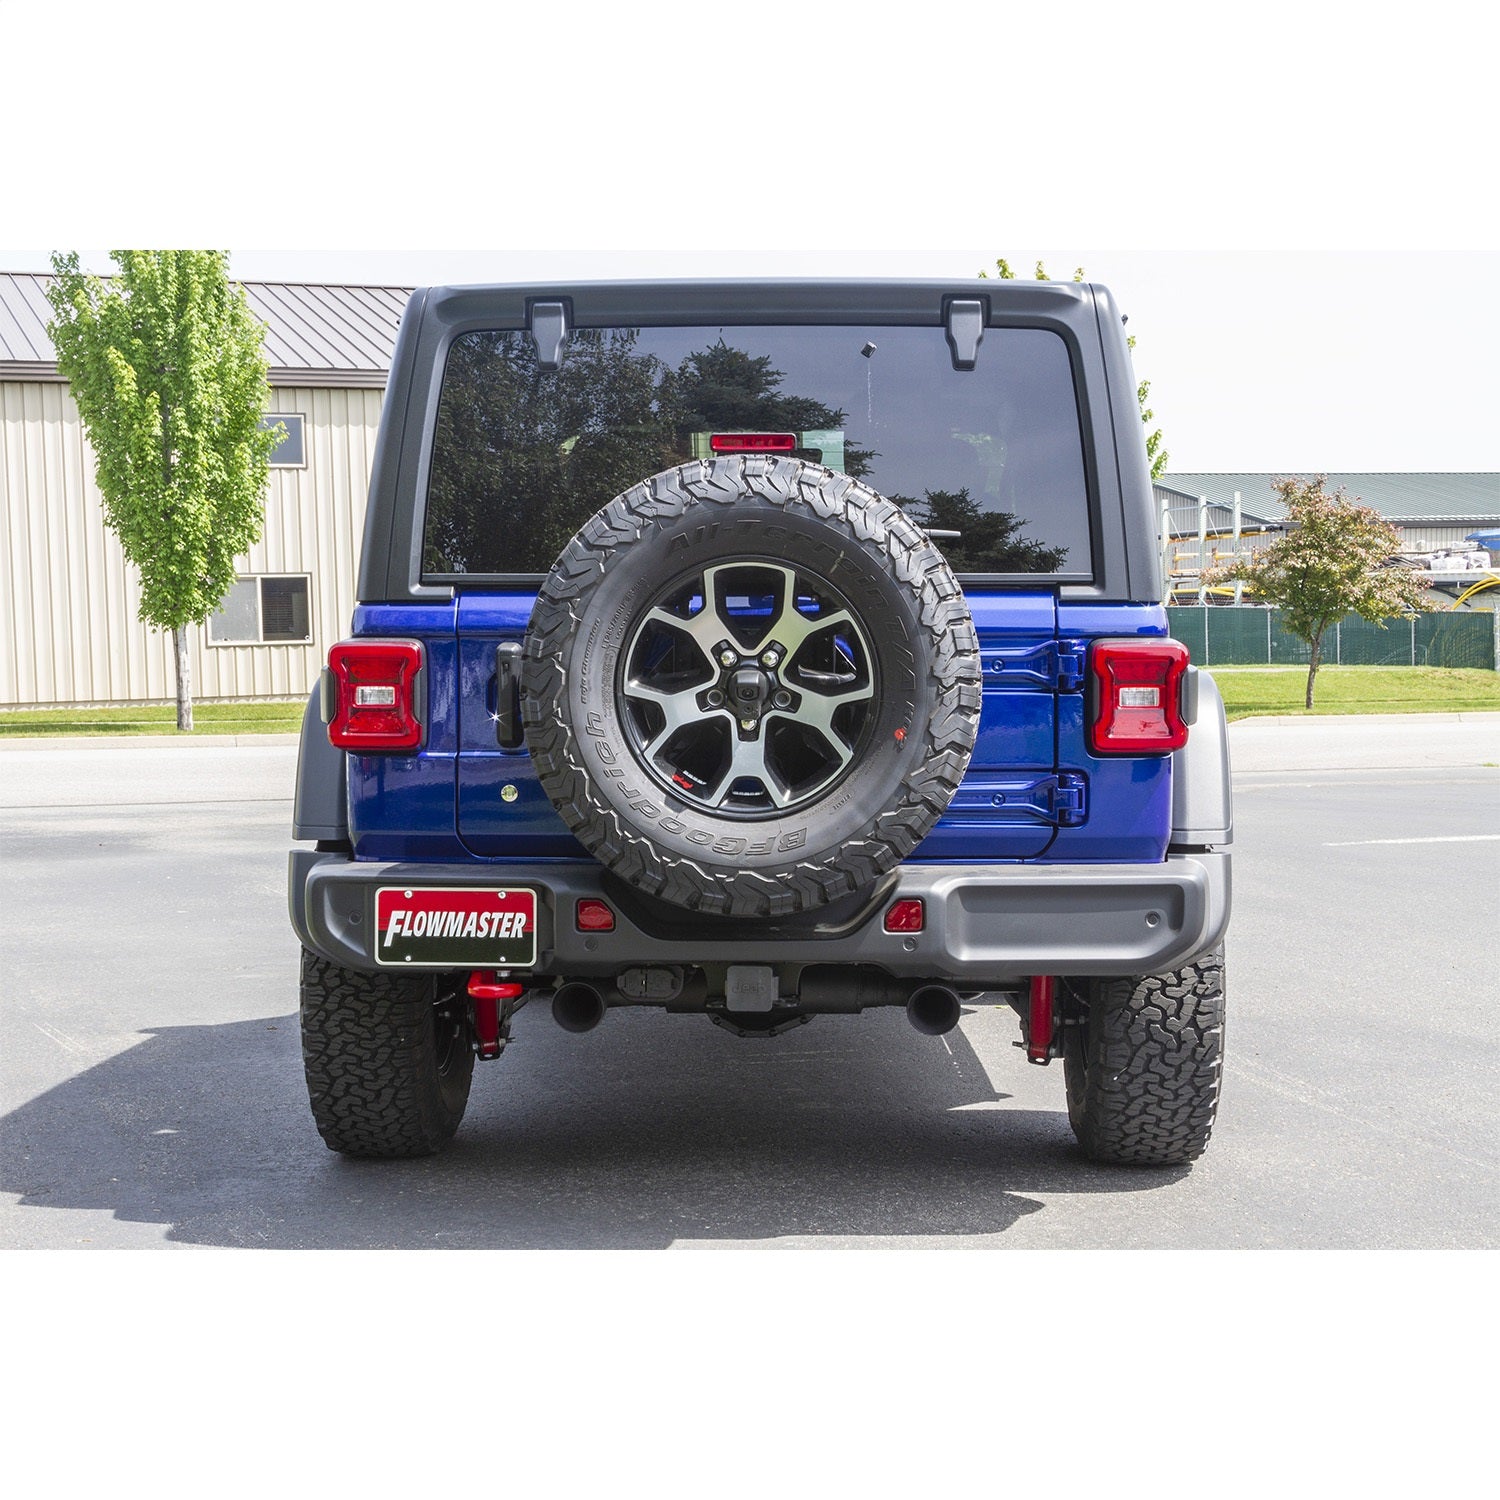 Flowmaster 817844 Outlaw Series Cat Back Exhaust System Fits Wrangler (JL)